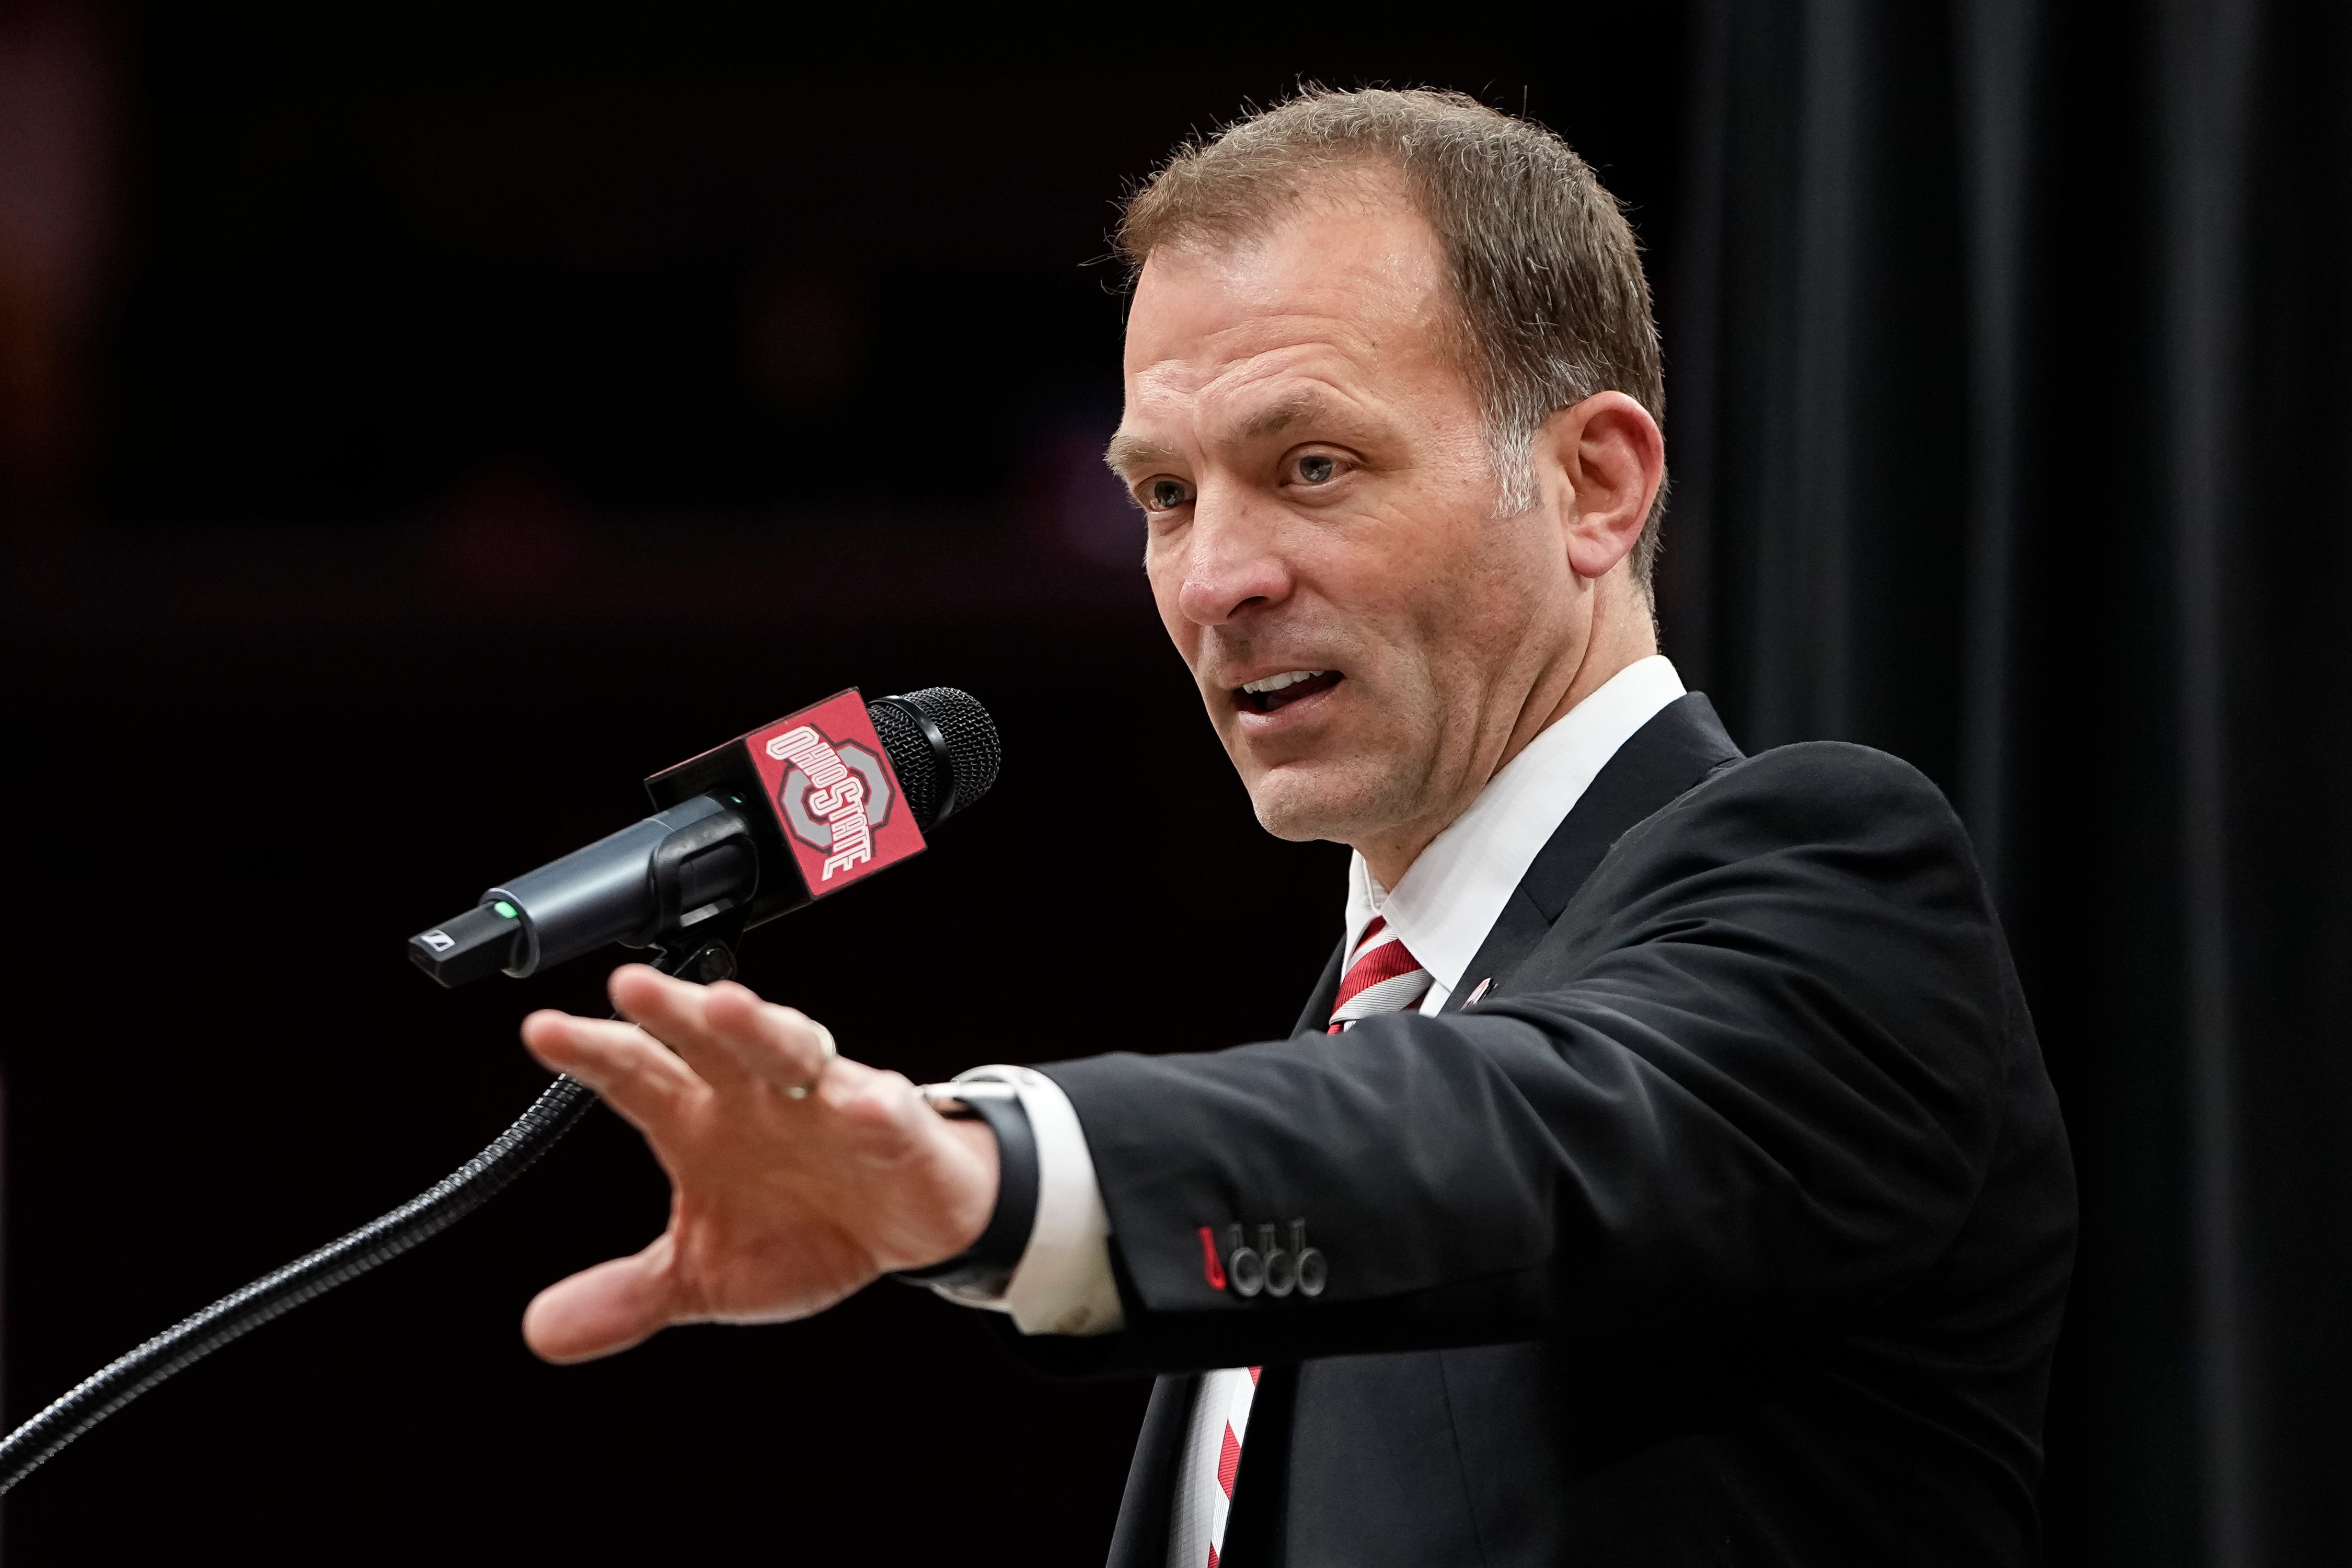 Ohio State s incoming athletic director Ross Bjork speaks during the introductory press conference for basketball head coach Jake Diebler at Value City Arena.